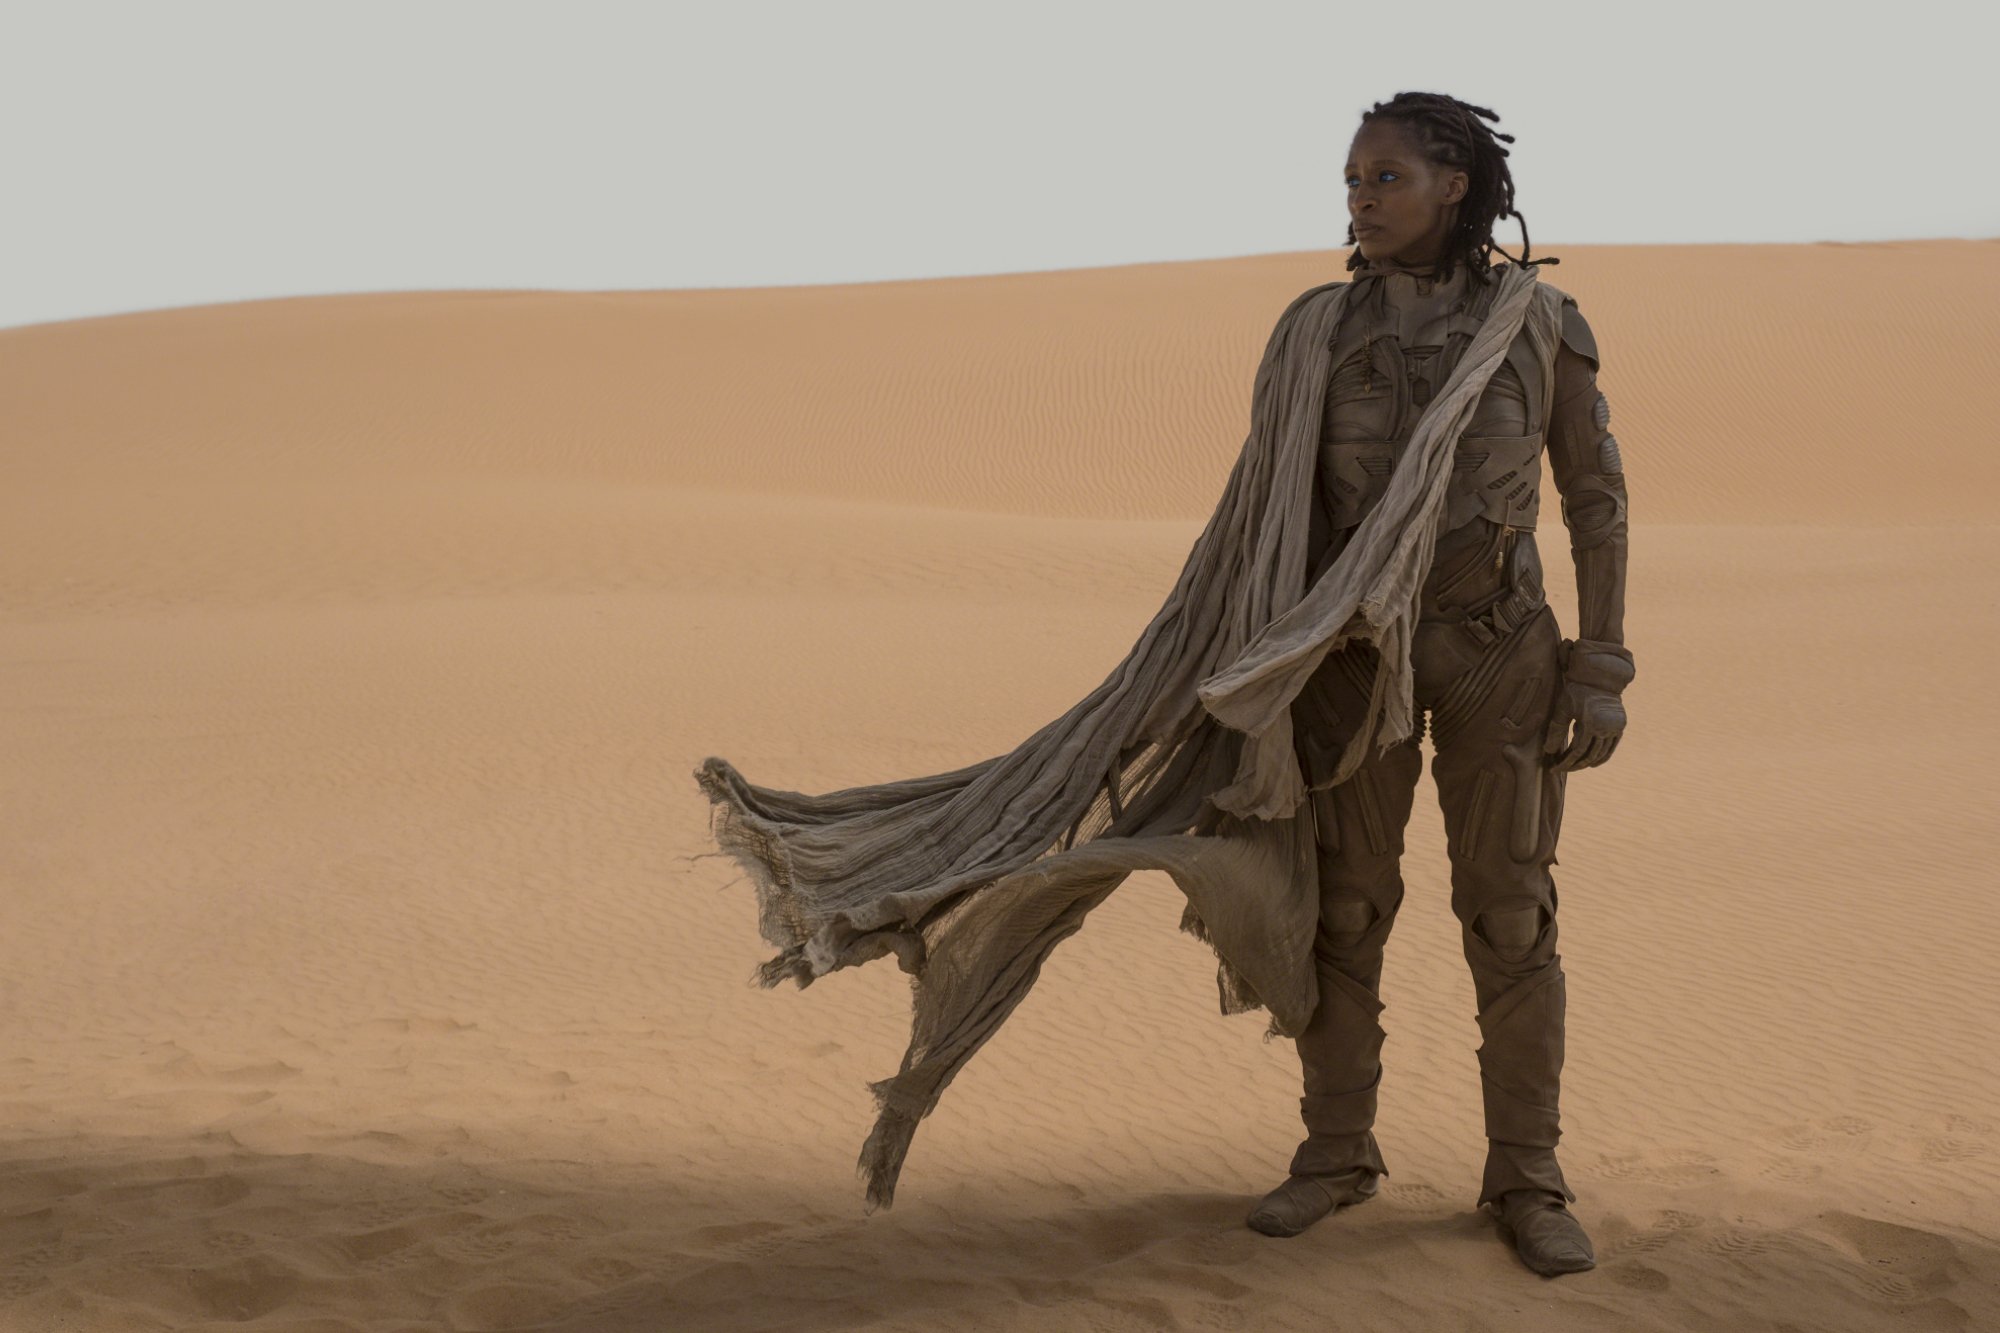 'Dune' actor Sharon Duncan-Brewster as Liet Kynes standing on the sand dune in suit